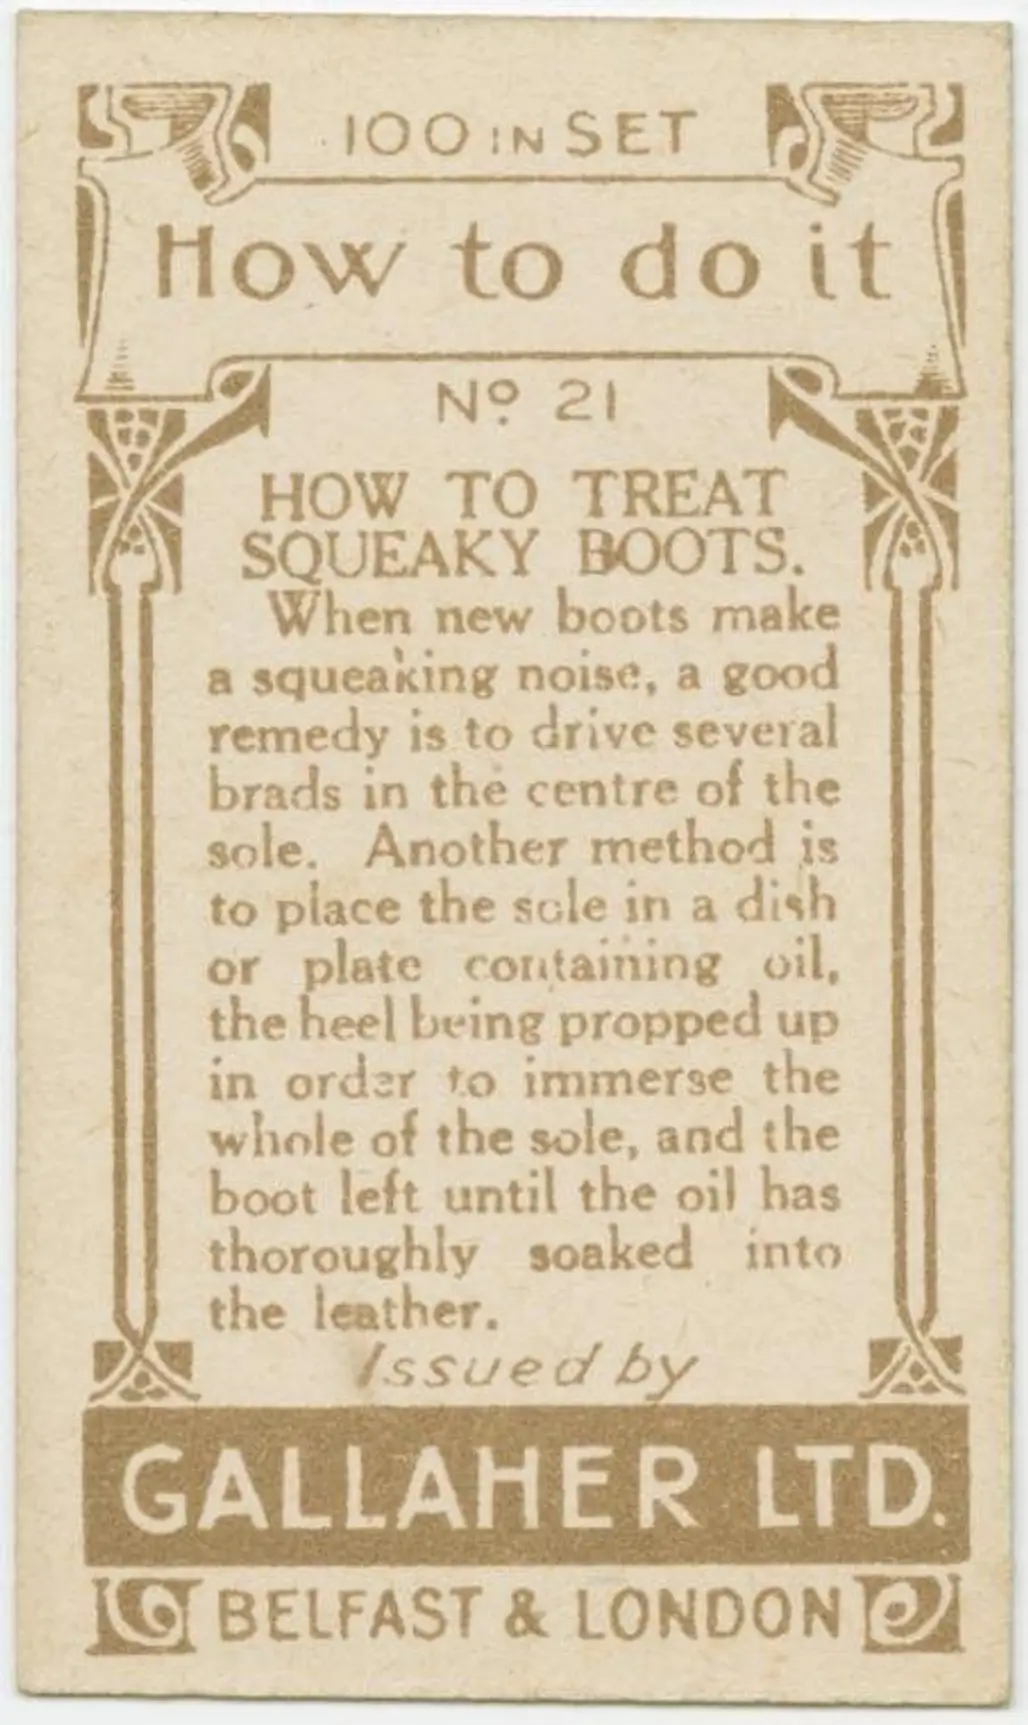 Are Your Boots Squeaking when You Walk?